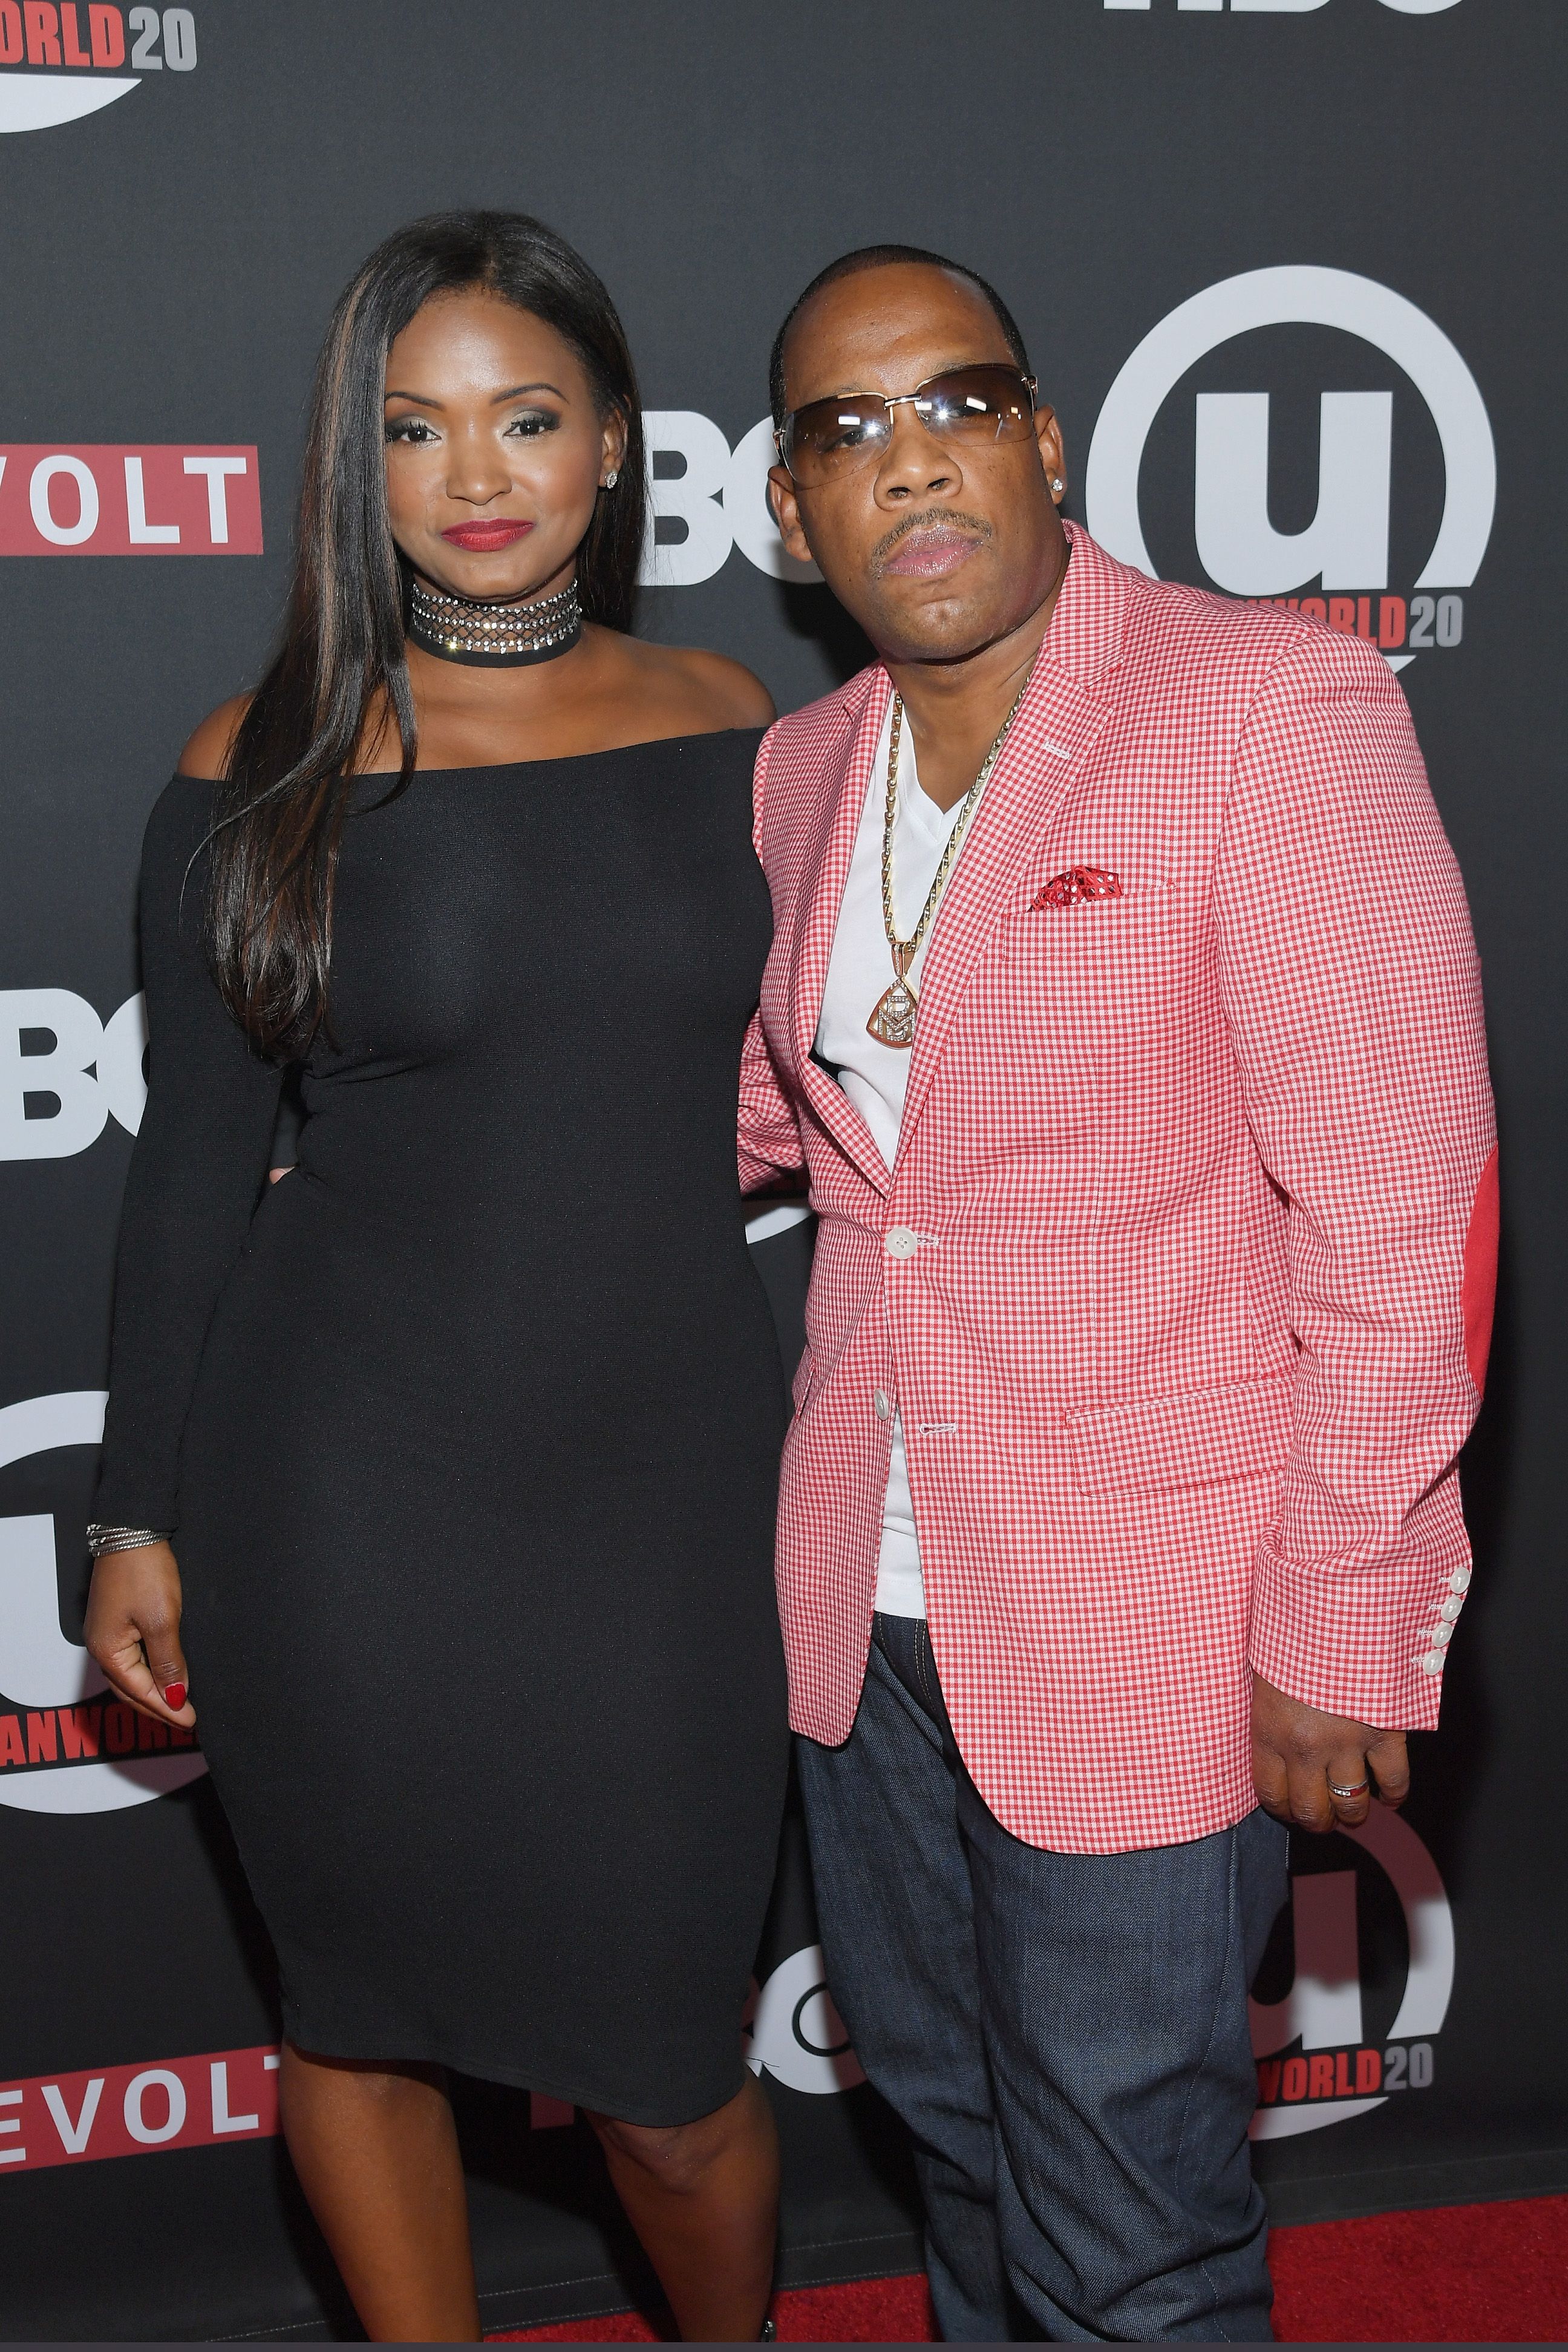 Teasha Bivins and Michael Bivins at the 20th Annual Urbanworld Film Festival in 2016. | Source: Getty Images